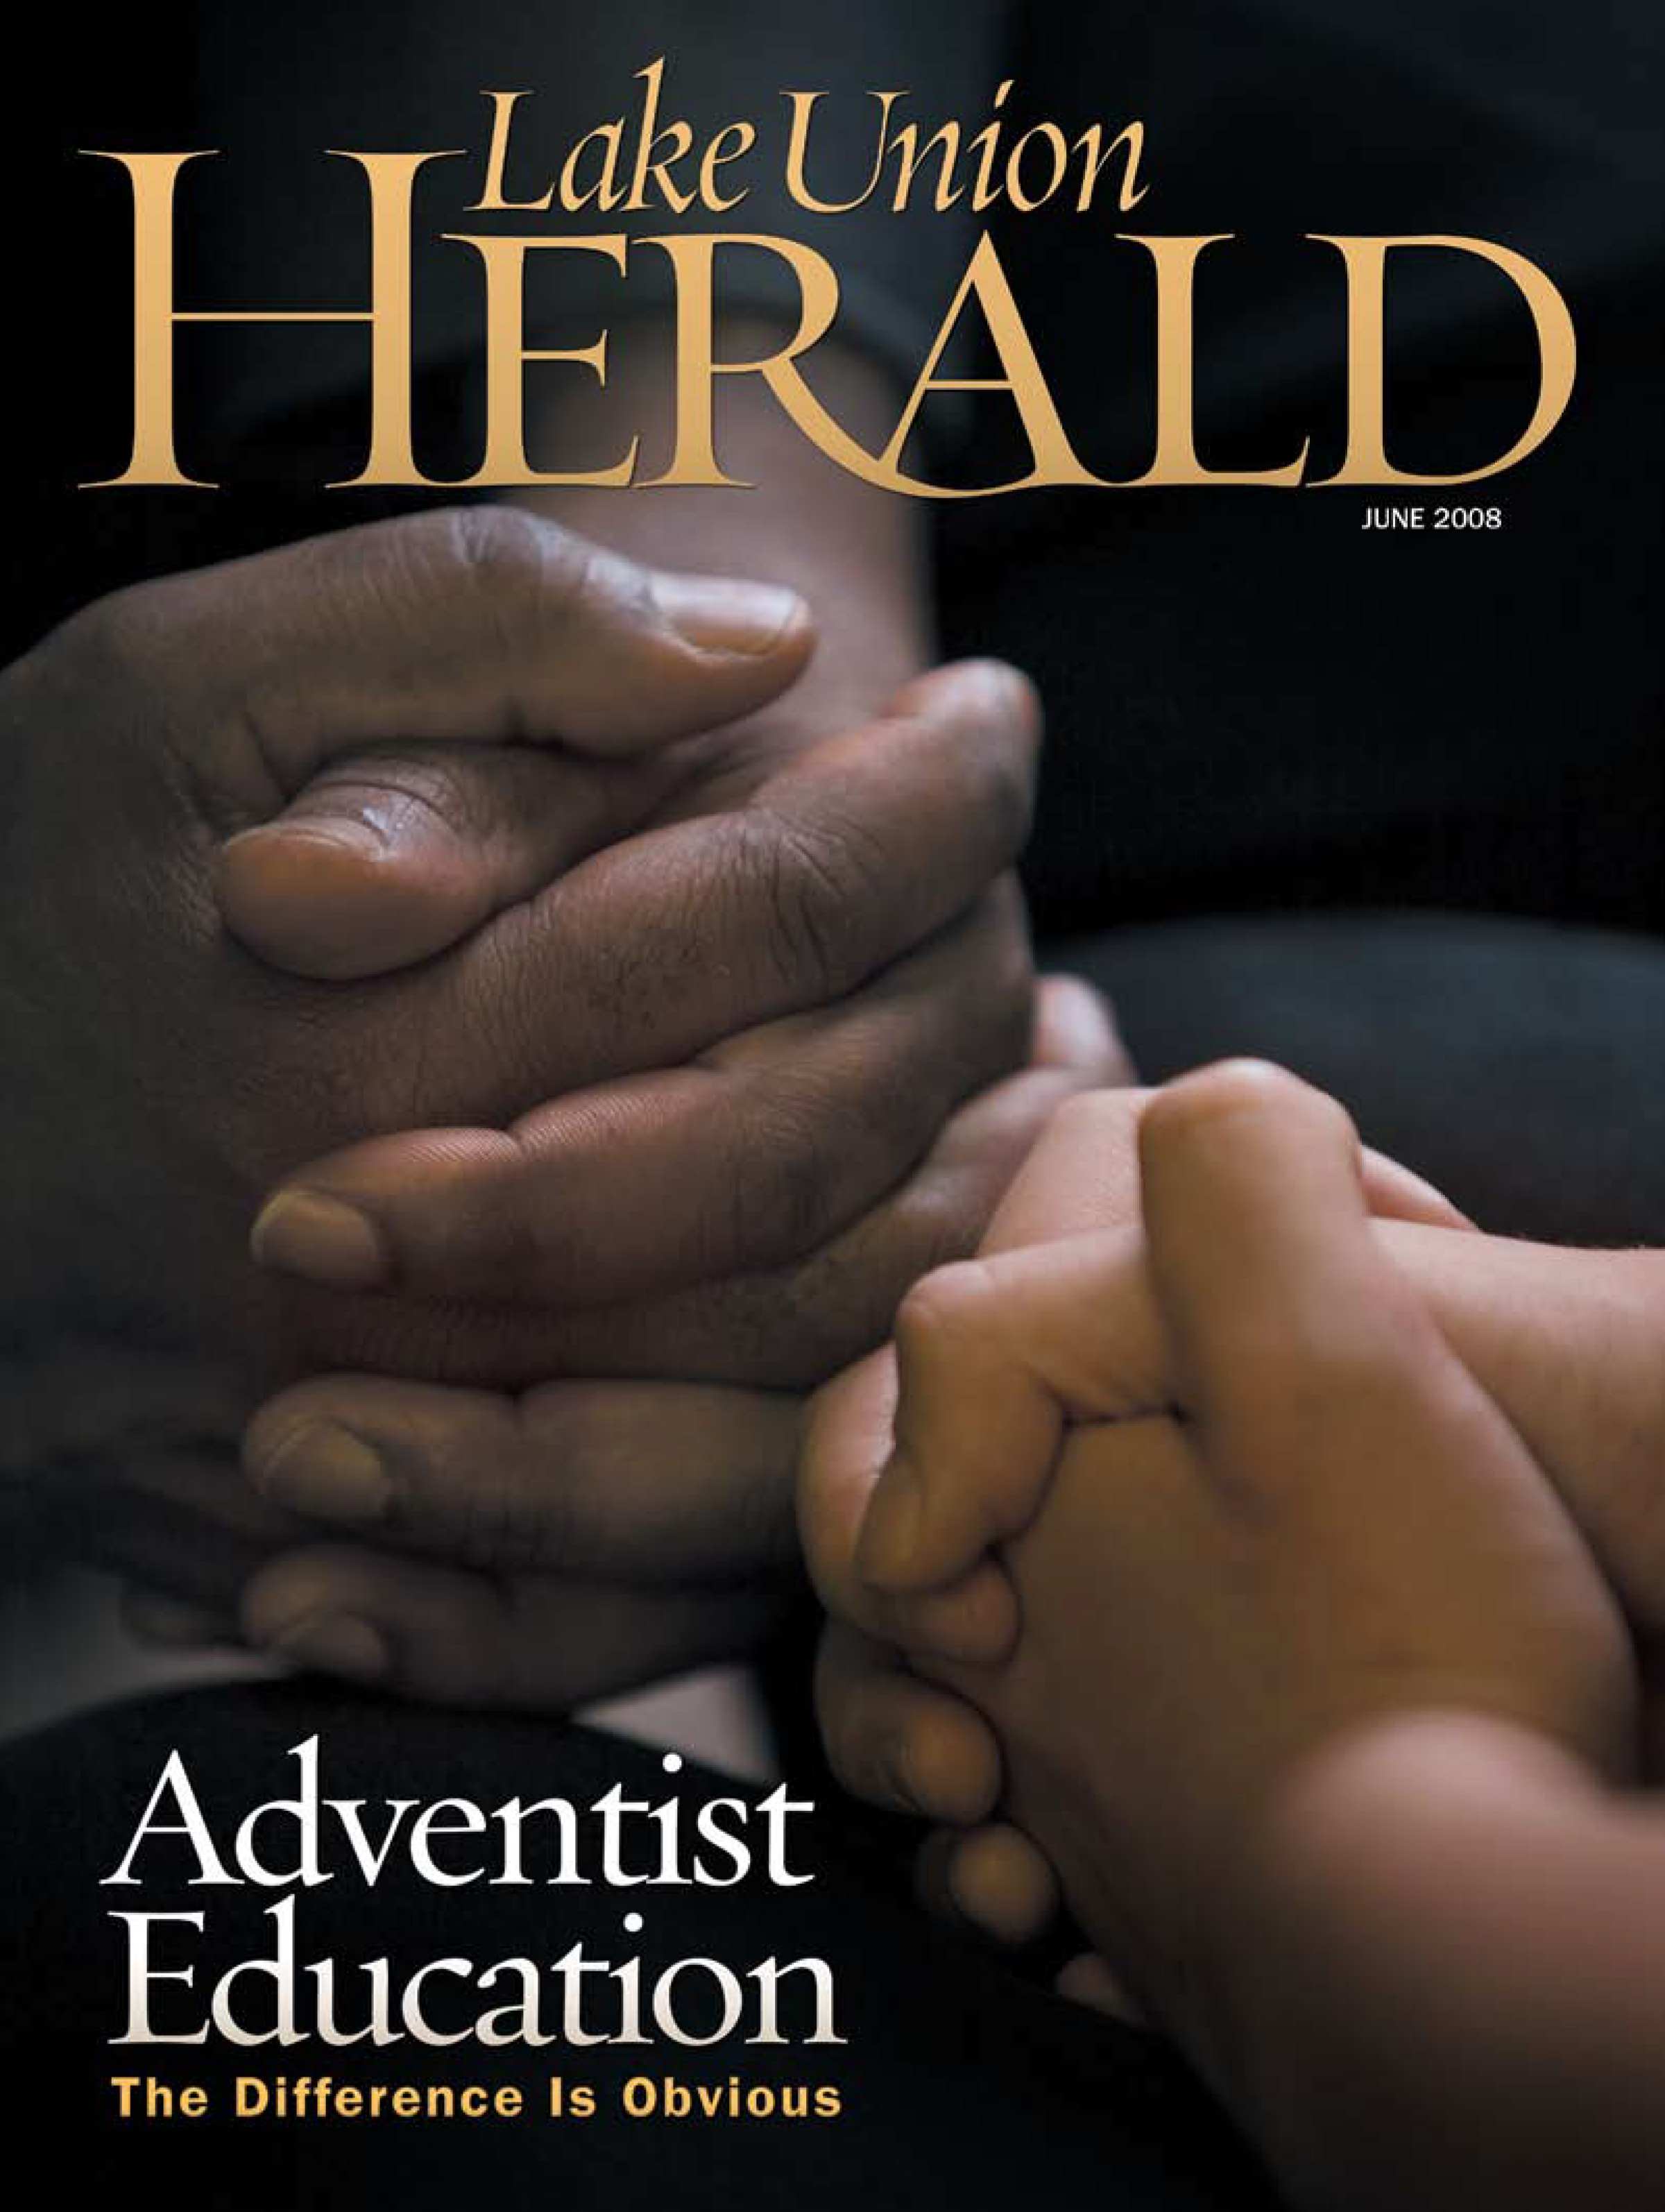 June 2008 Issue